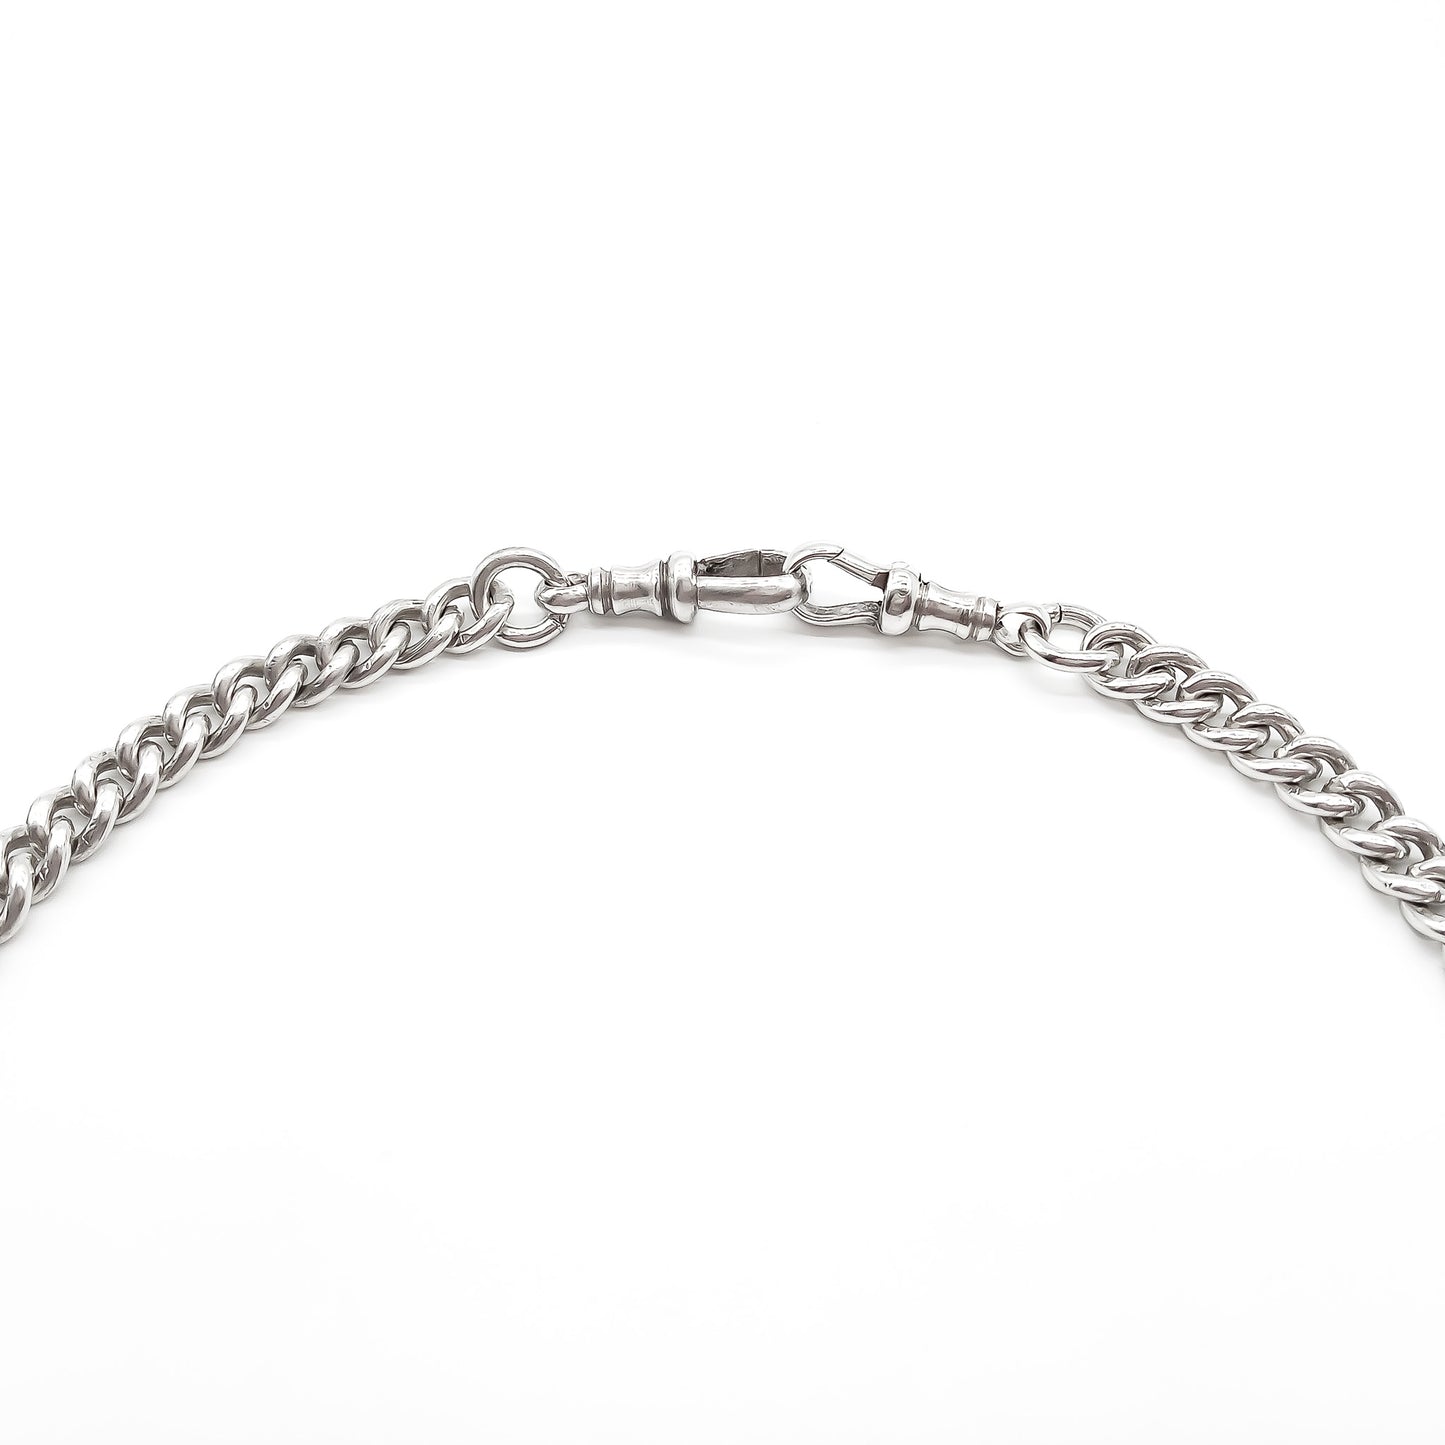 Classic sterling silver Victorian curb link fob chain with a t-bar and two dog clips. Every link is stamped.